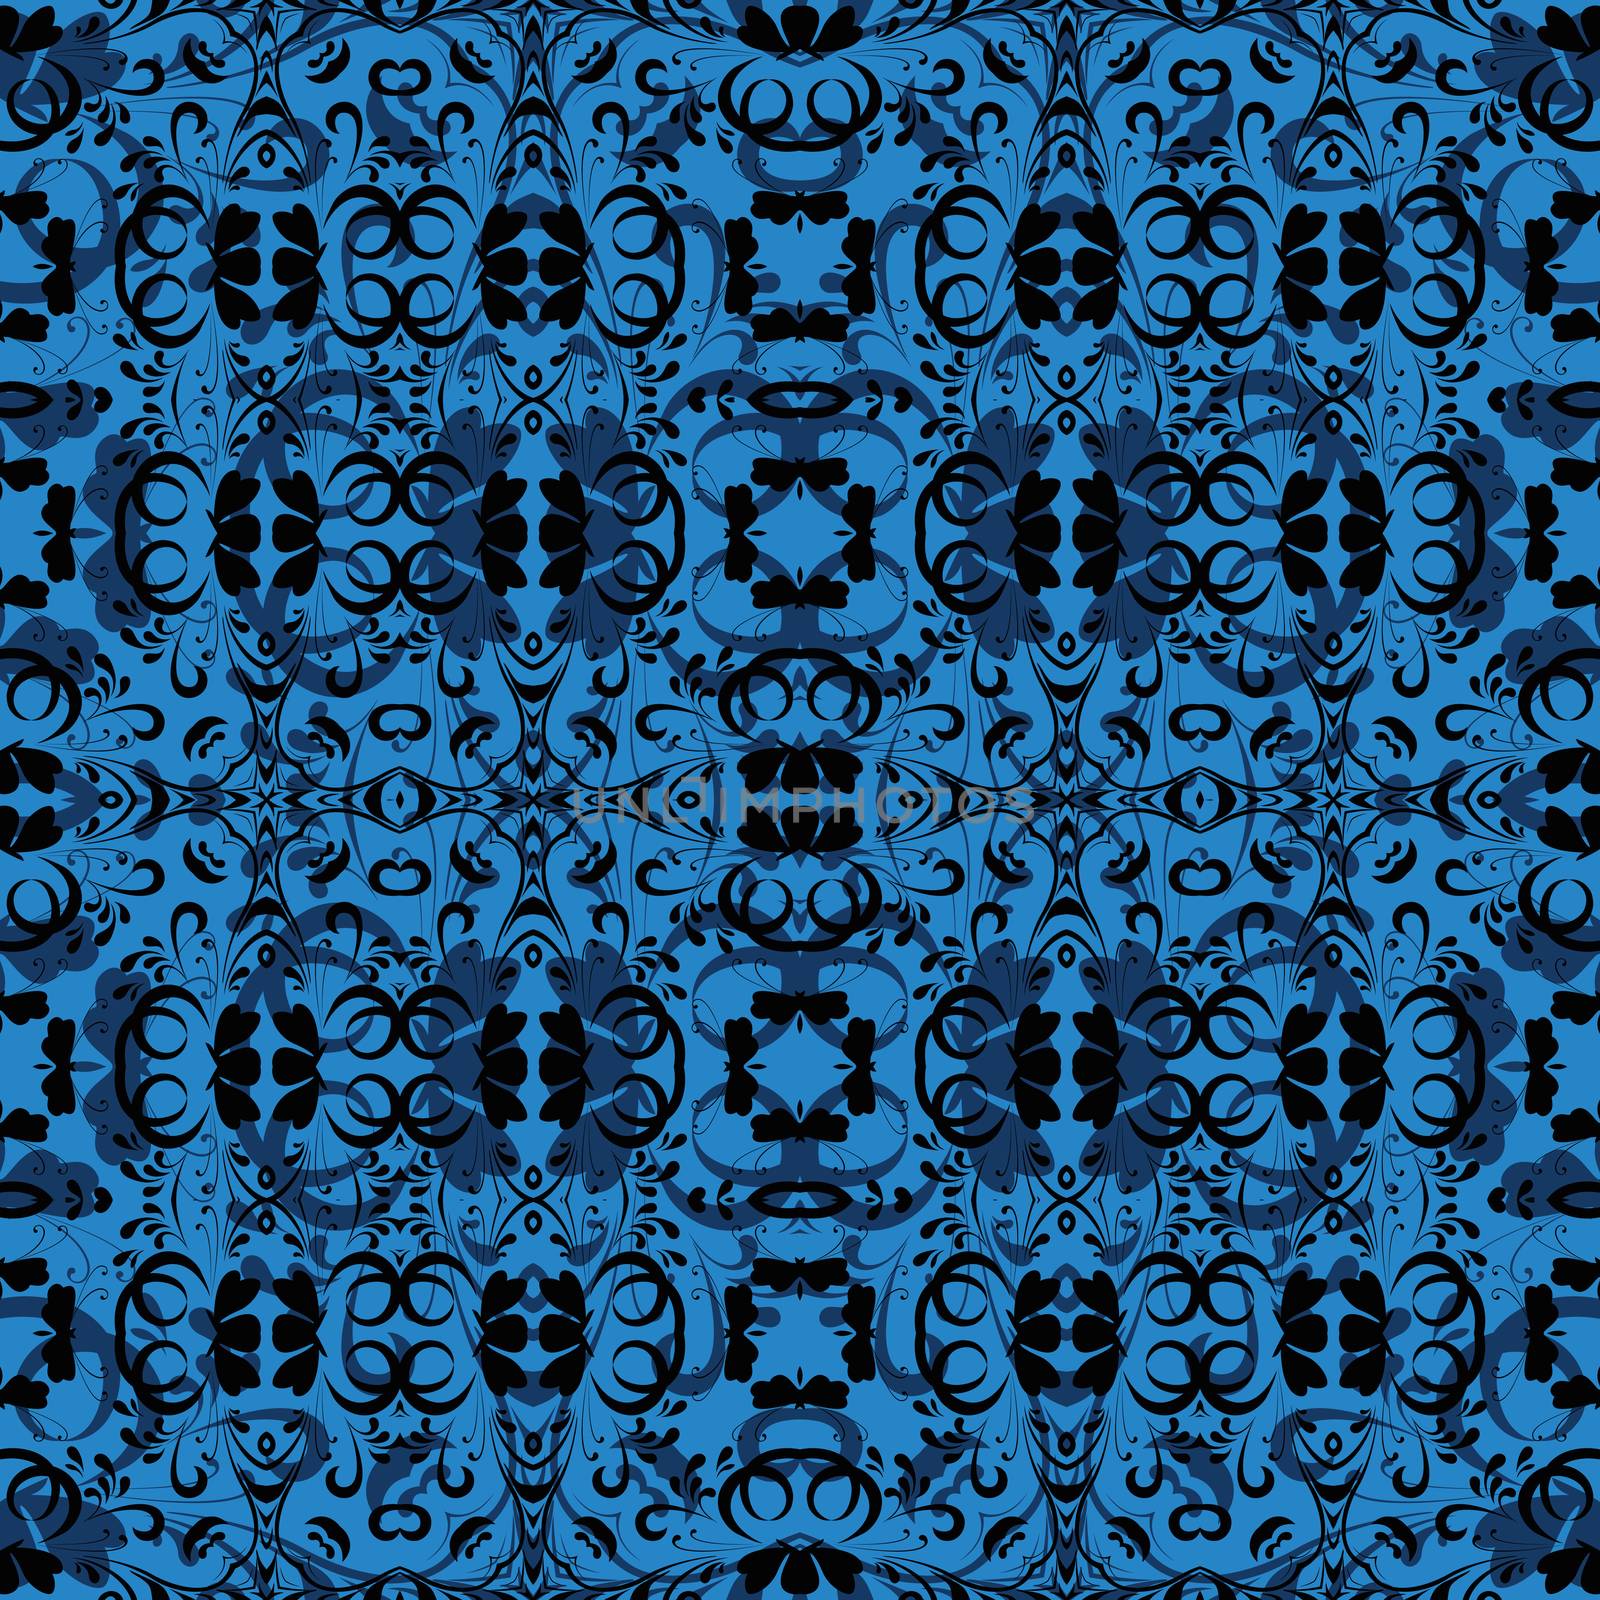 Seamless abstract pattern, black contours on blue background.